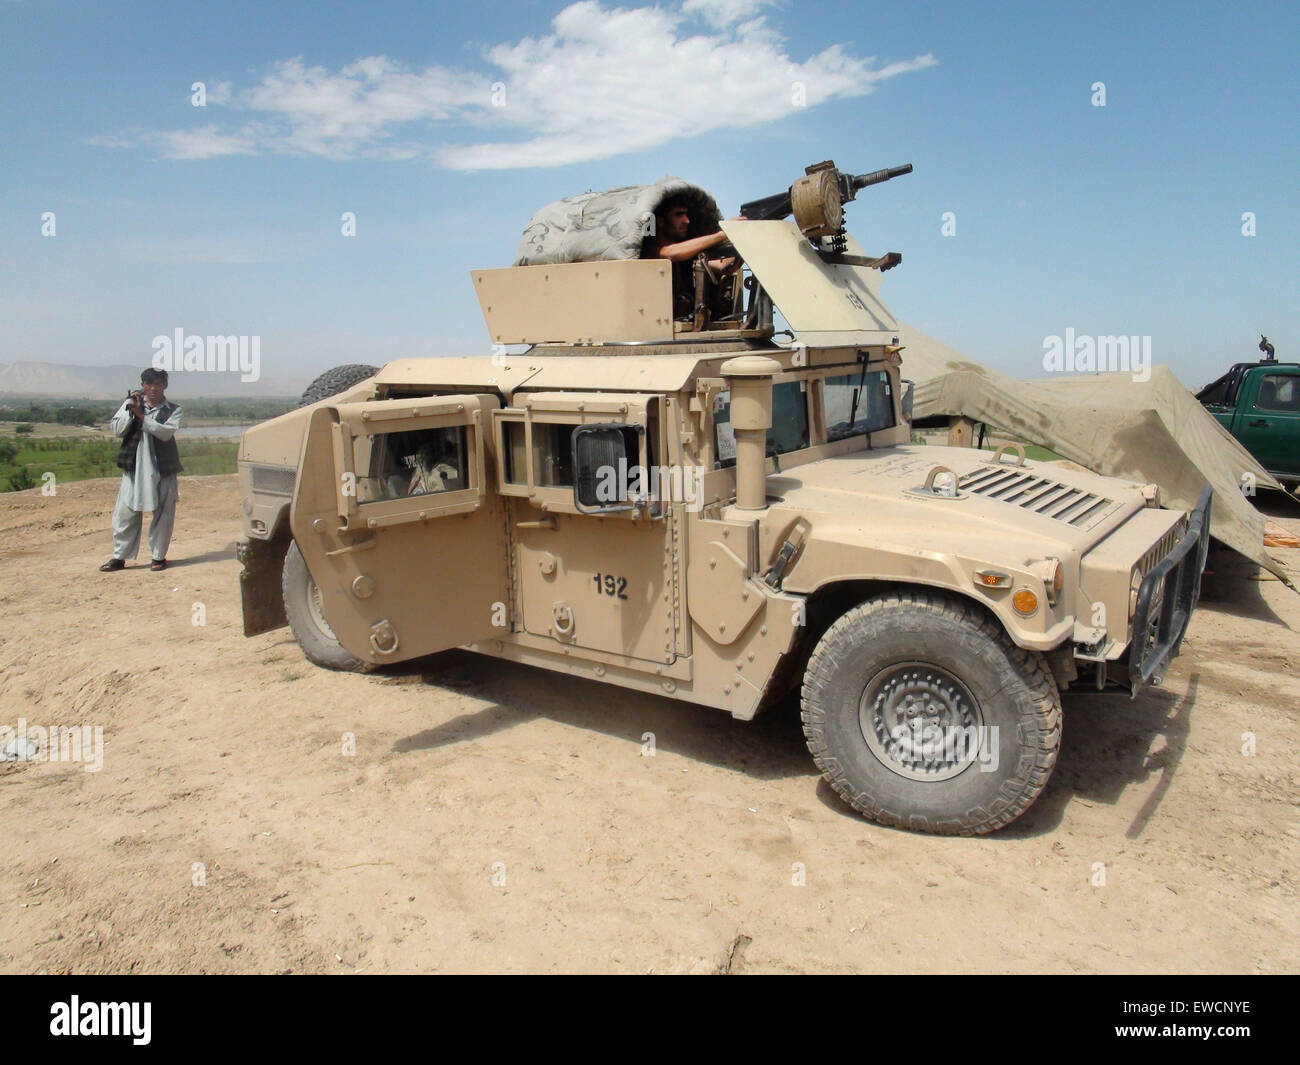 (150623) -- KUNDUZ, June 23, 2015 (Xinhua) -- An Afghan soldier keeps watch on a military vehicle during an operation against Taliban in Kunduz province, northern Afghanistan, June 23, 2015. Afghan National Security Forces (ANSF) on Tuesday recaptured a district in northern province of Kunduz seized by Taliban militants over the weekend, killing over 80 rebels, provincial government spokesman said. (Xinhua/Ajmal) (zjy) Stock Photo